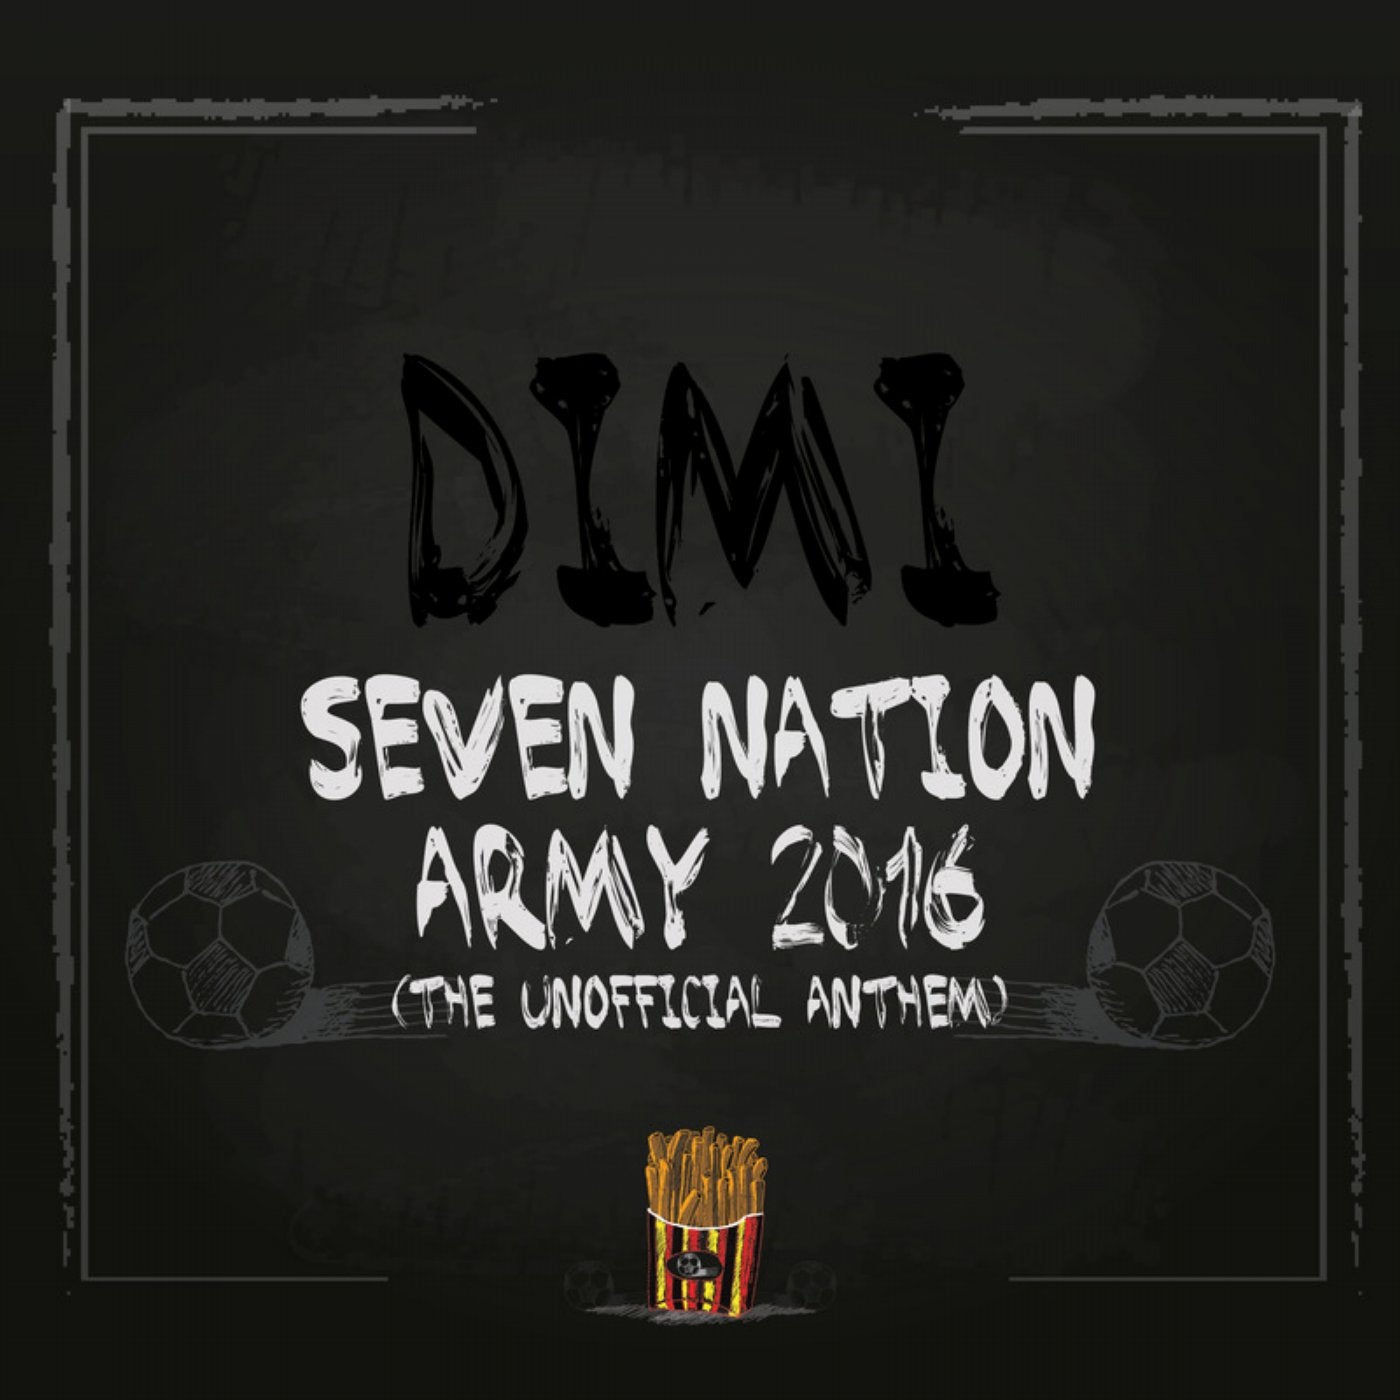 Seven Nation Army 2016 (The Unofficial Anthem)